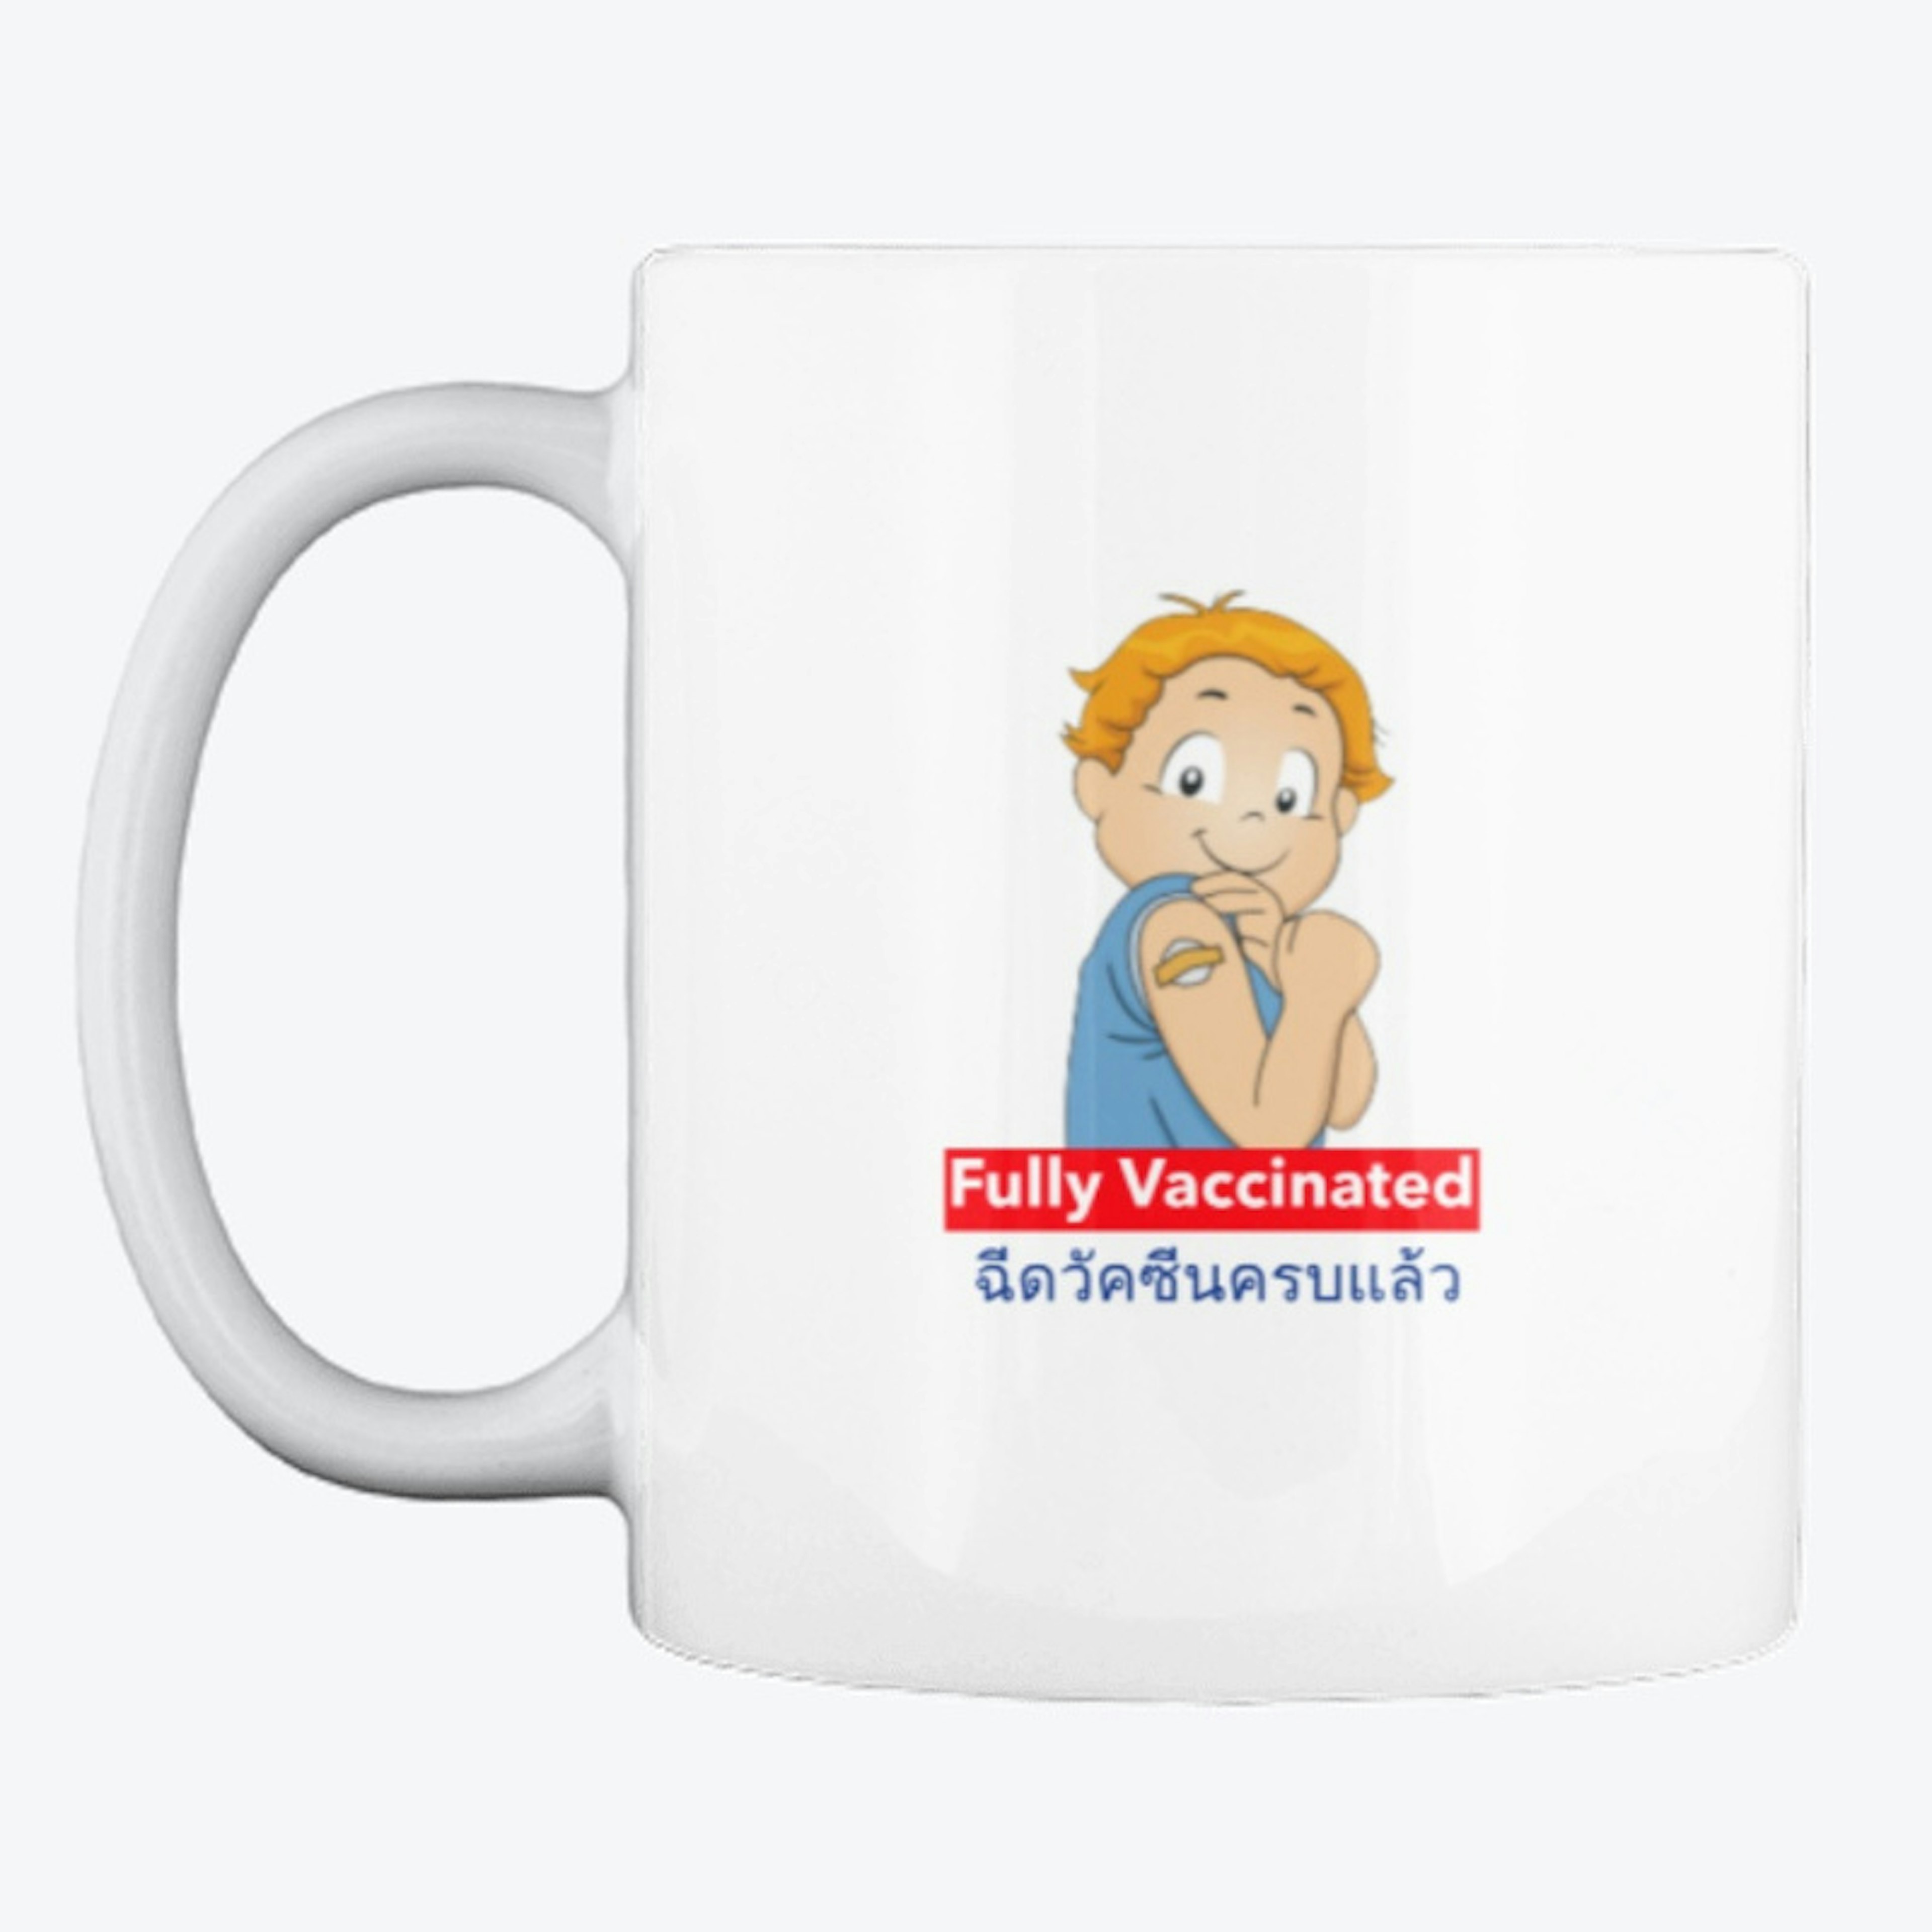 Fully Vaccinated - Funny Cute 2021 #8